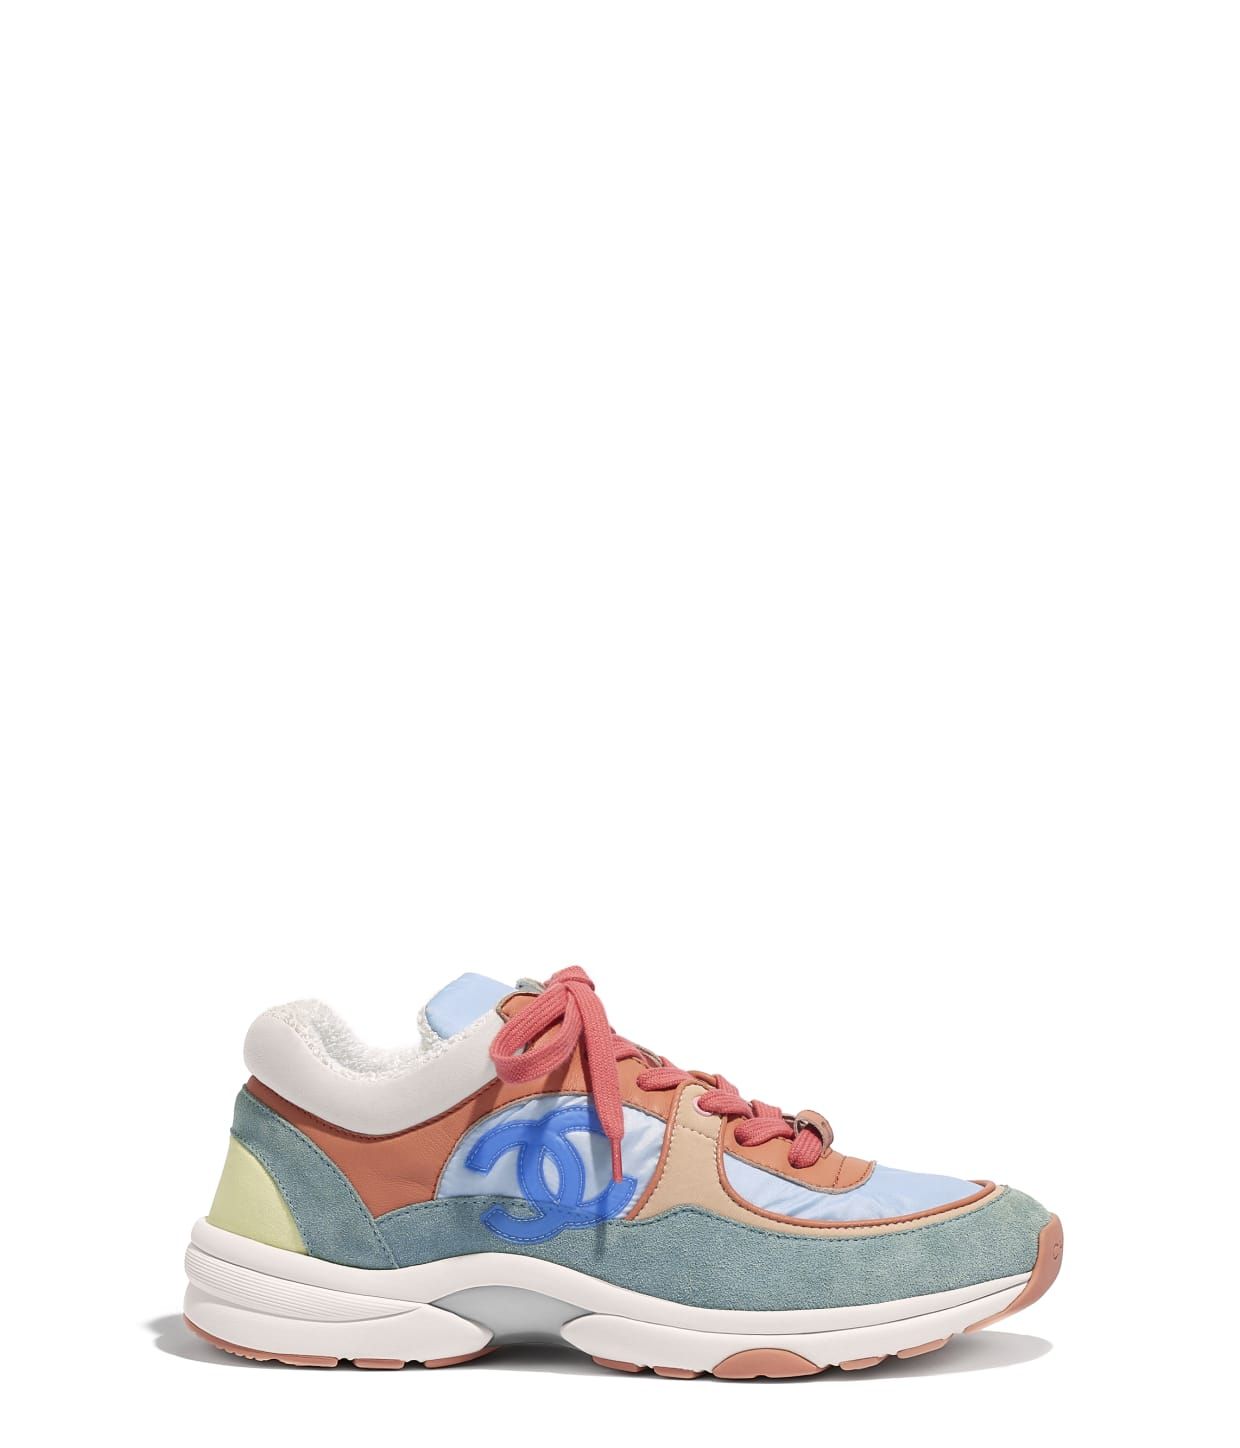 Nylon, Lambskin & Suede Calfskin Coral, Light Blue & White Sneakers | CHANEL | Chanel, Inc. (US)